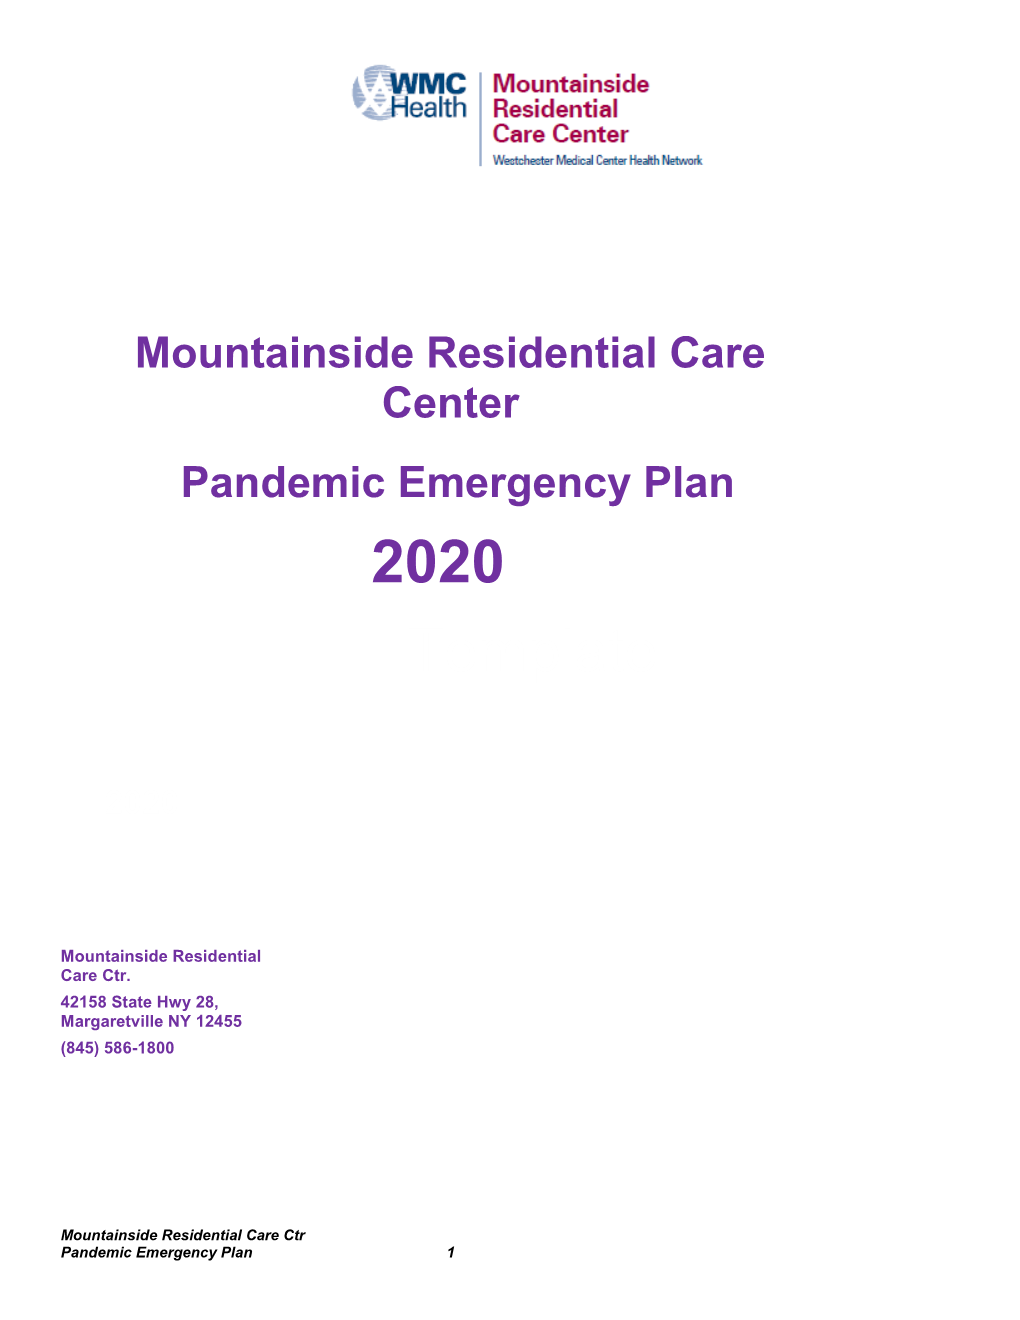 Mountainside Residential Care Center Pandemic Emergency Plan 2020 Template